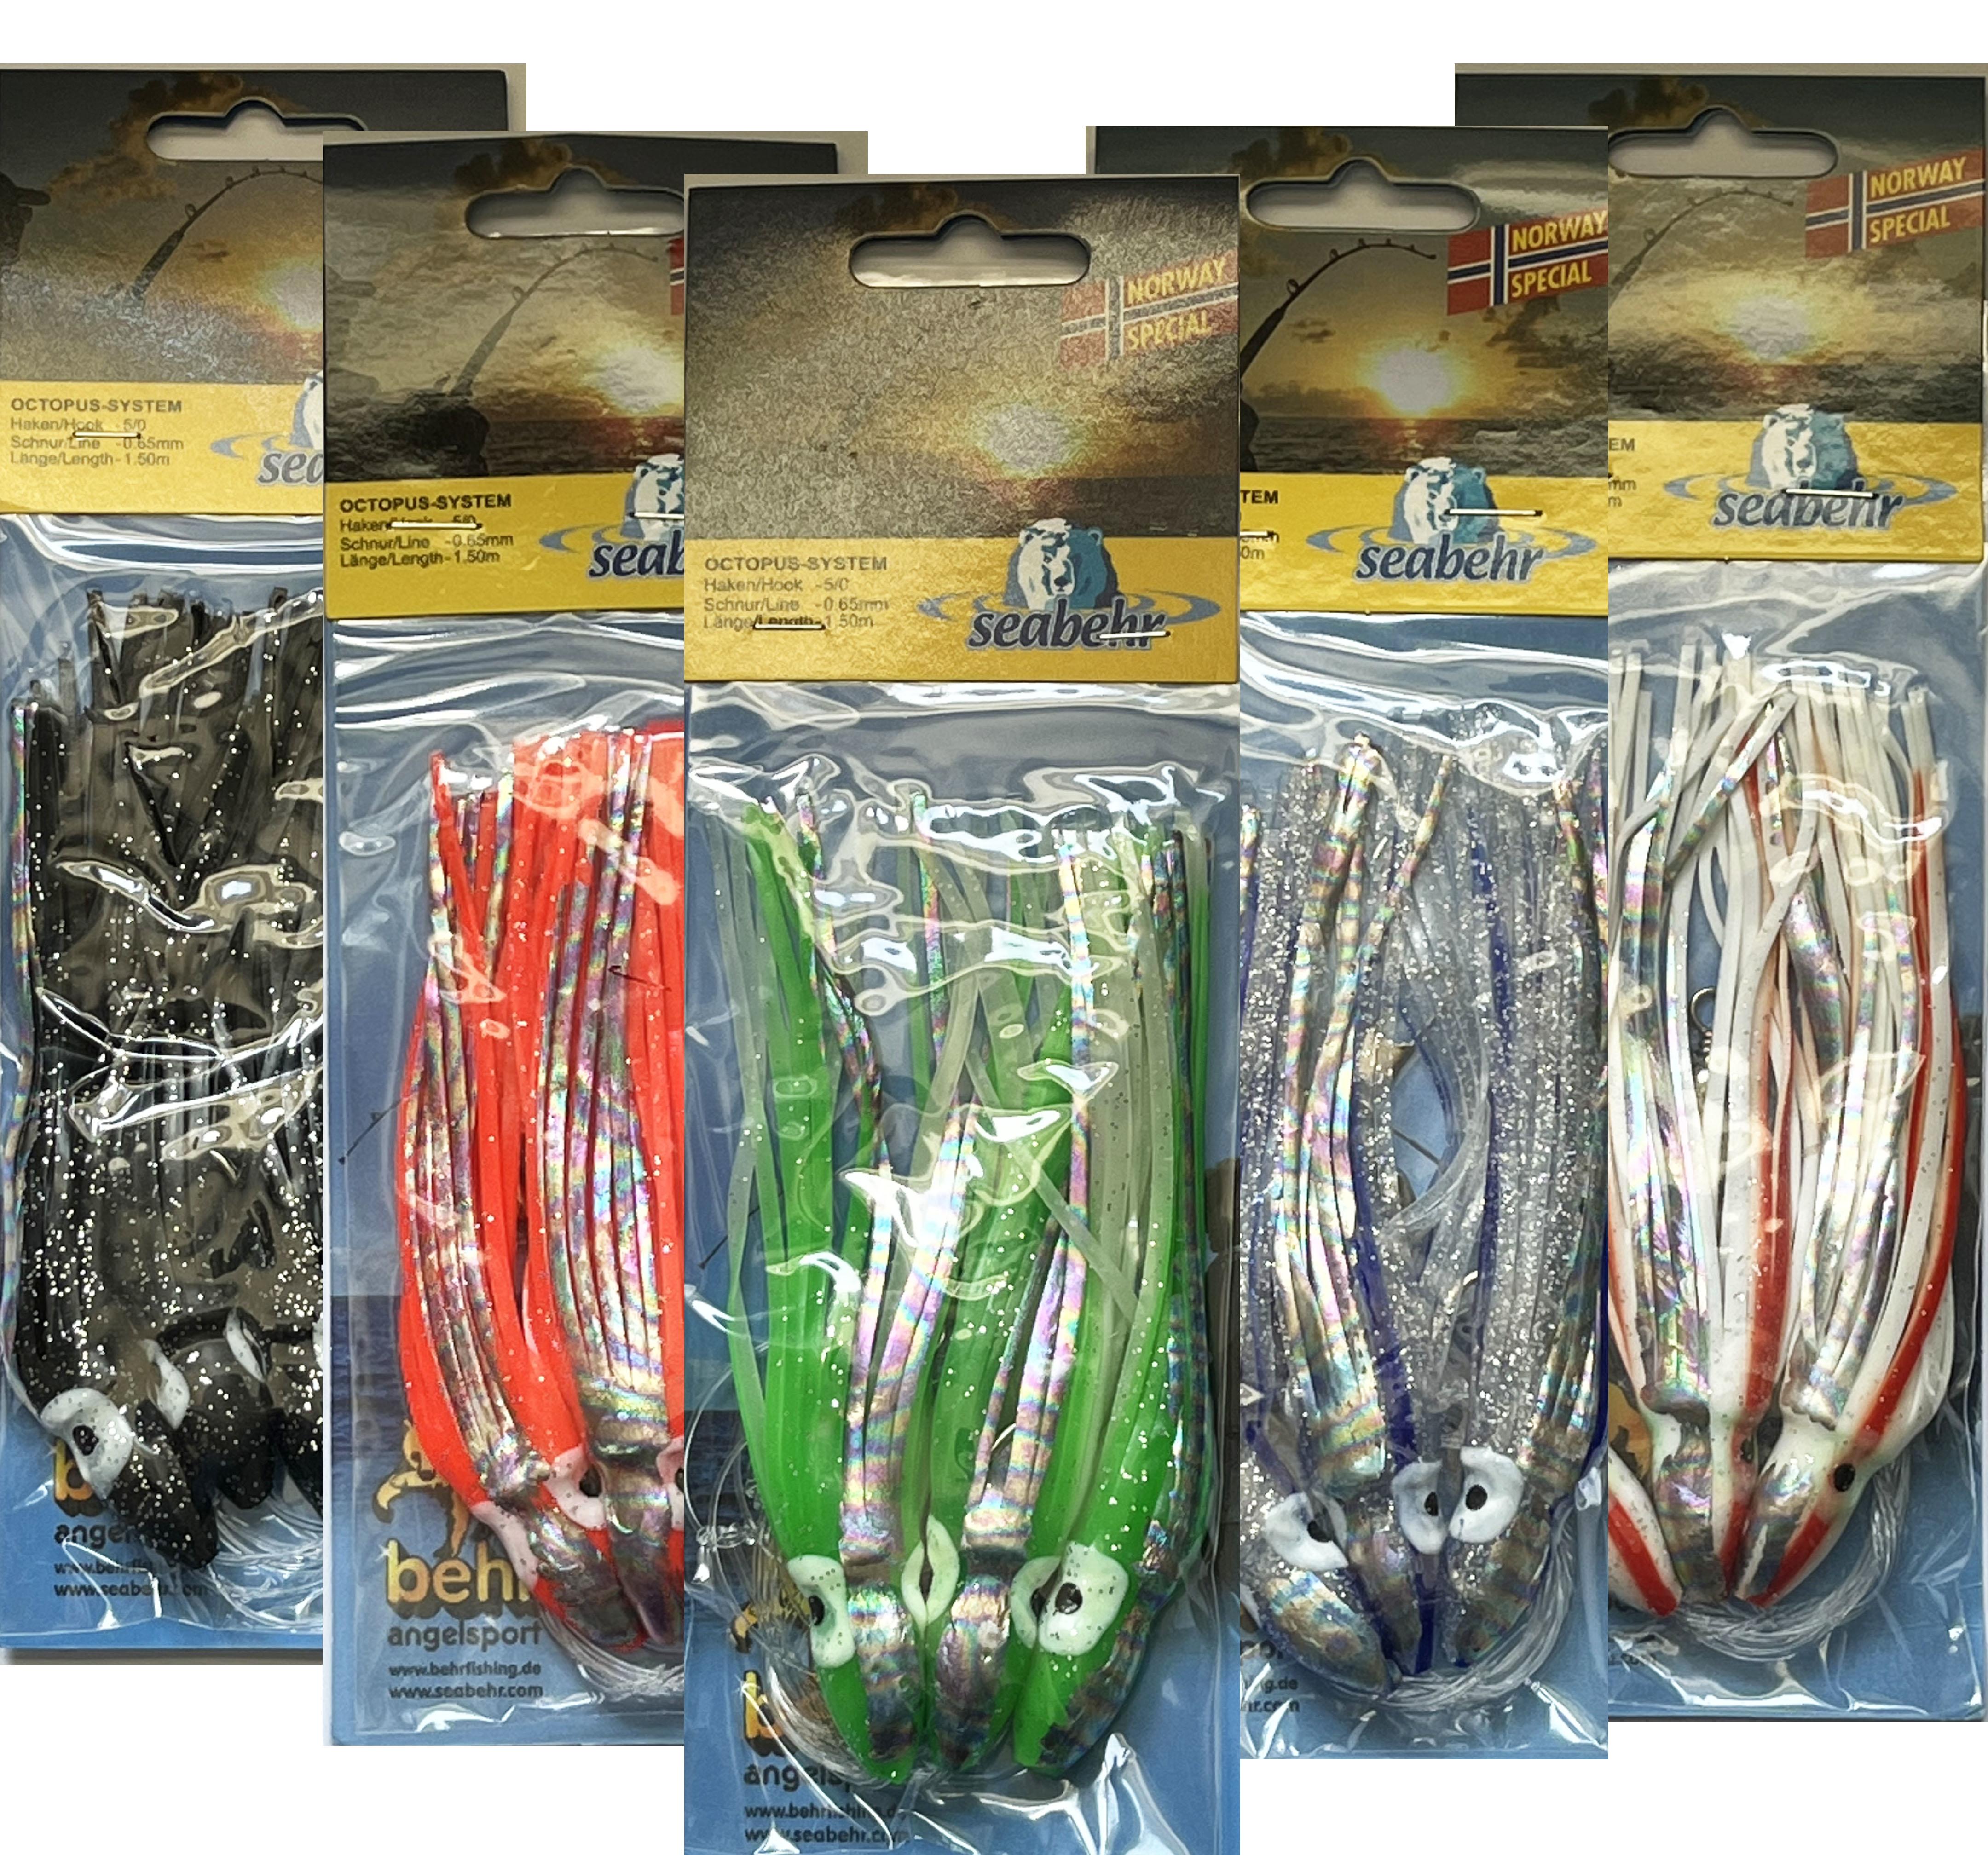 Behr Trendex Soft Lures Pike Perch Trout Pack Of 2 Golden Trout Lures 12cm 36g 